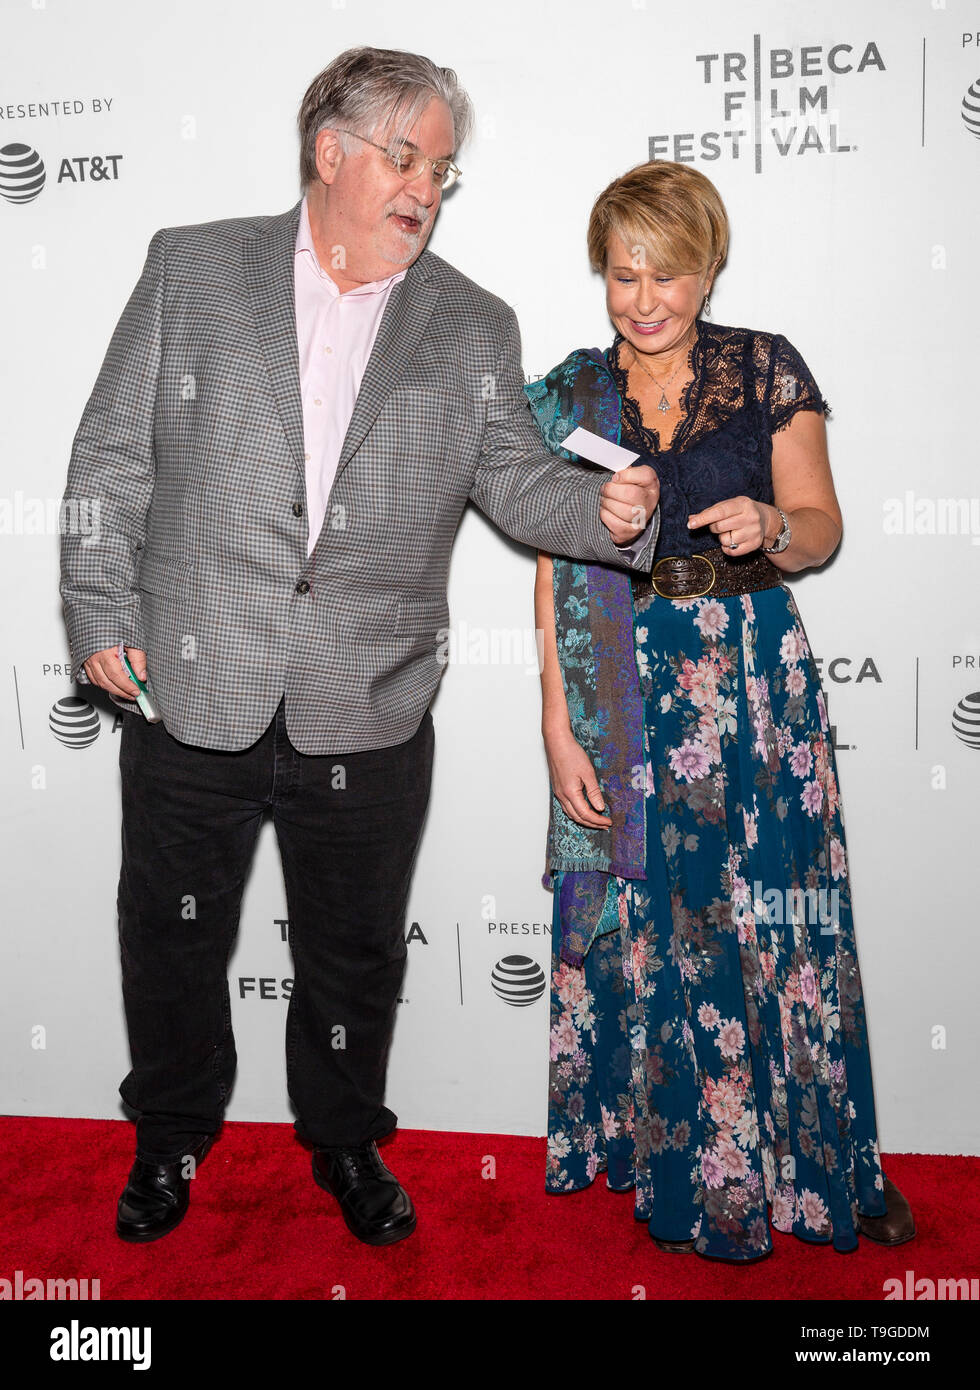 New York, NY - April 28, 2019: Matt Groening and Yeardley Smith attend 'The Simpsons' 30th Anniversary celebration during the 2019 Tribeca Film Festiv Stock Photo